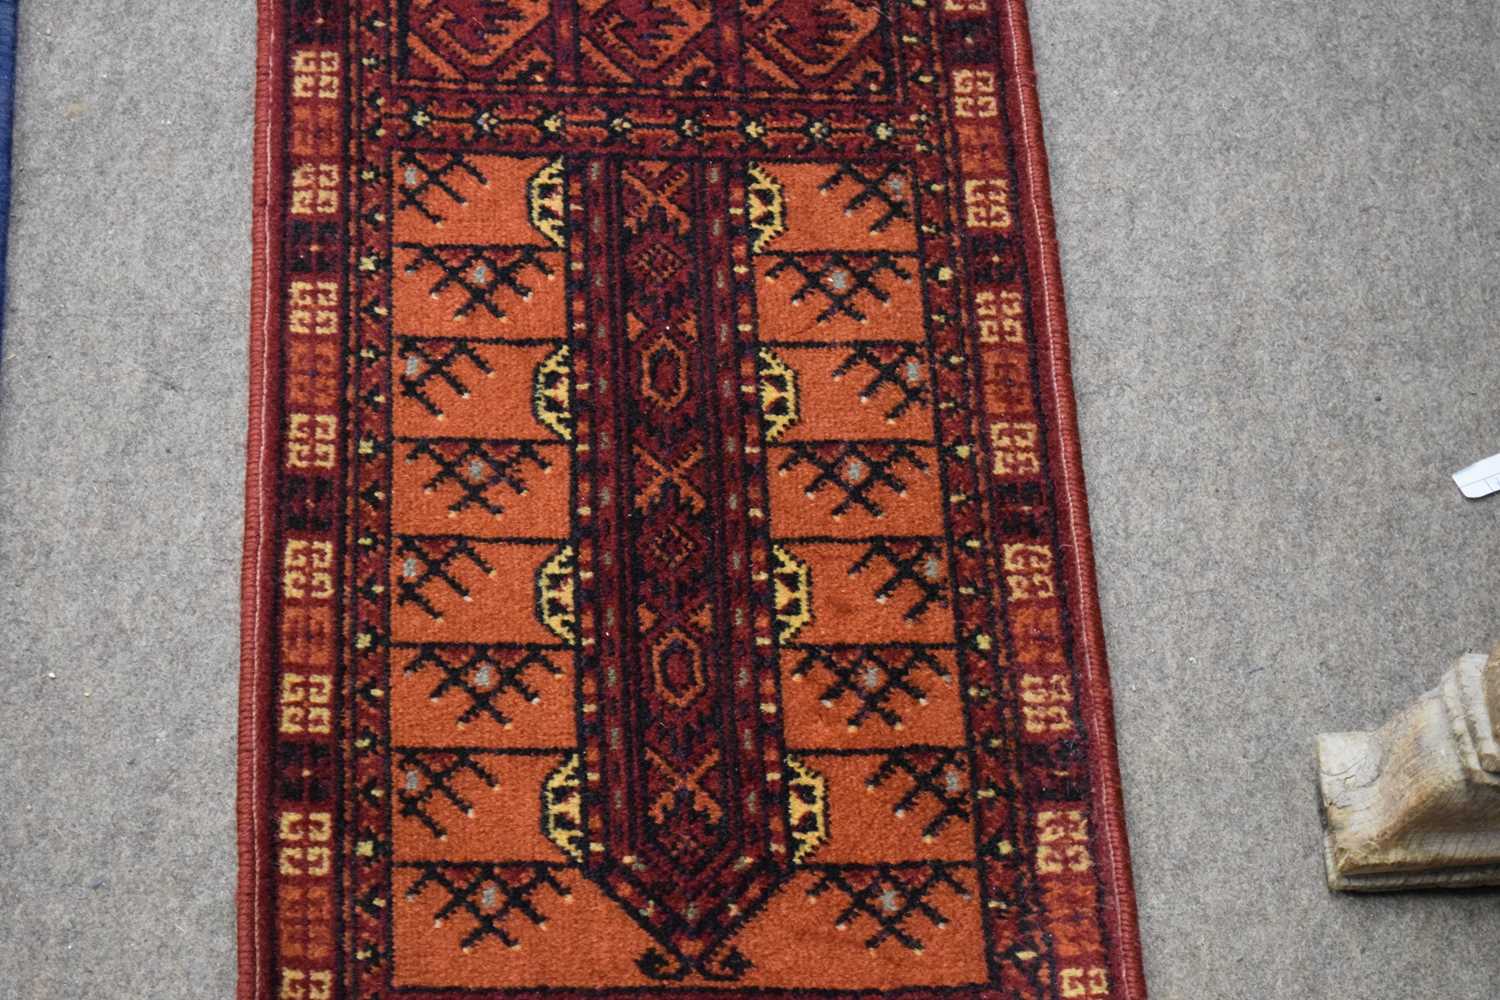 Small Middle Eastern wool runner carpet decorated with central lozenge on a principally red and - Image 3 of 4